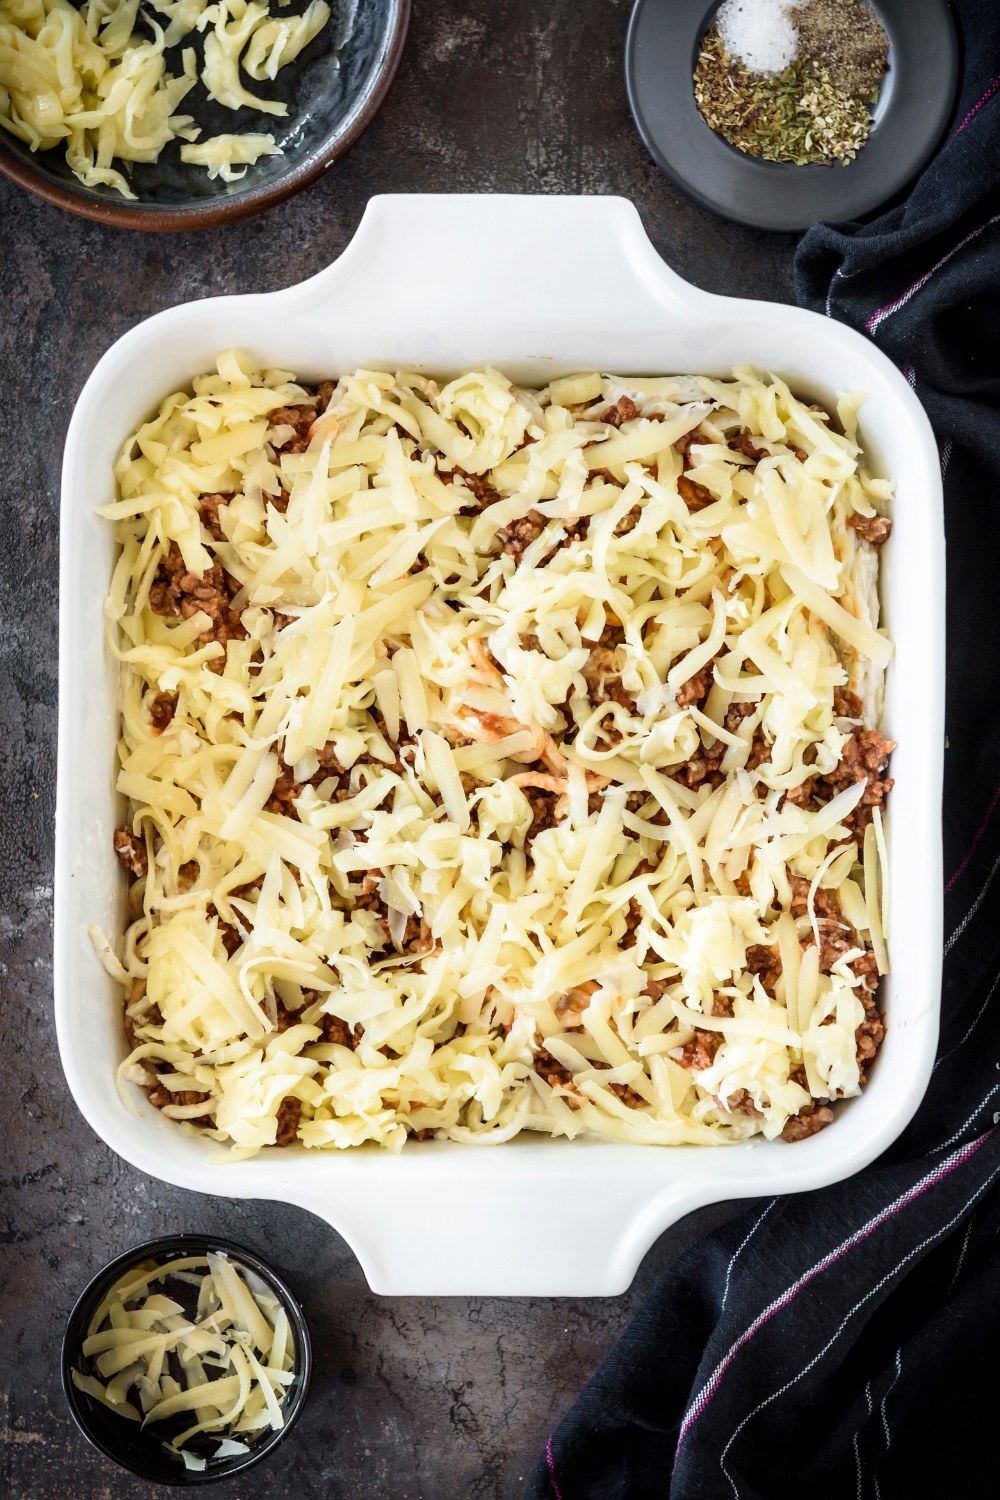 A baking dish filled with spaghetti and cooked ground beef, covered in shredded cheese.